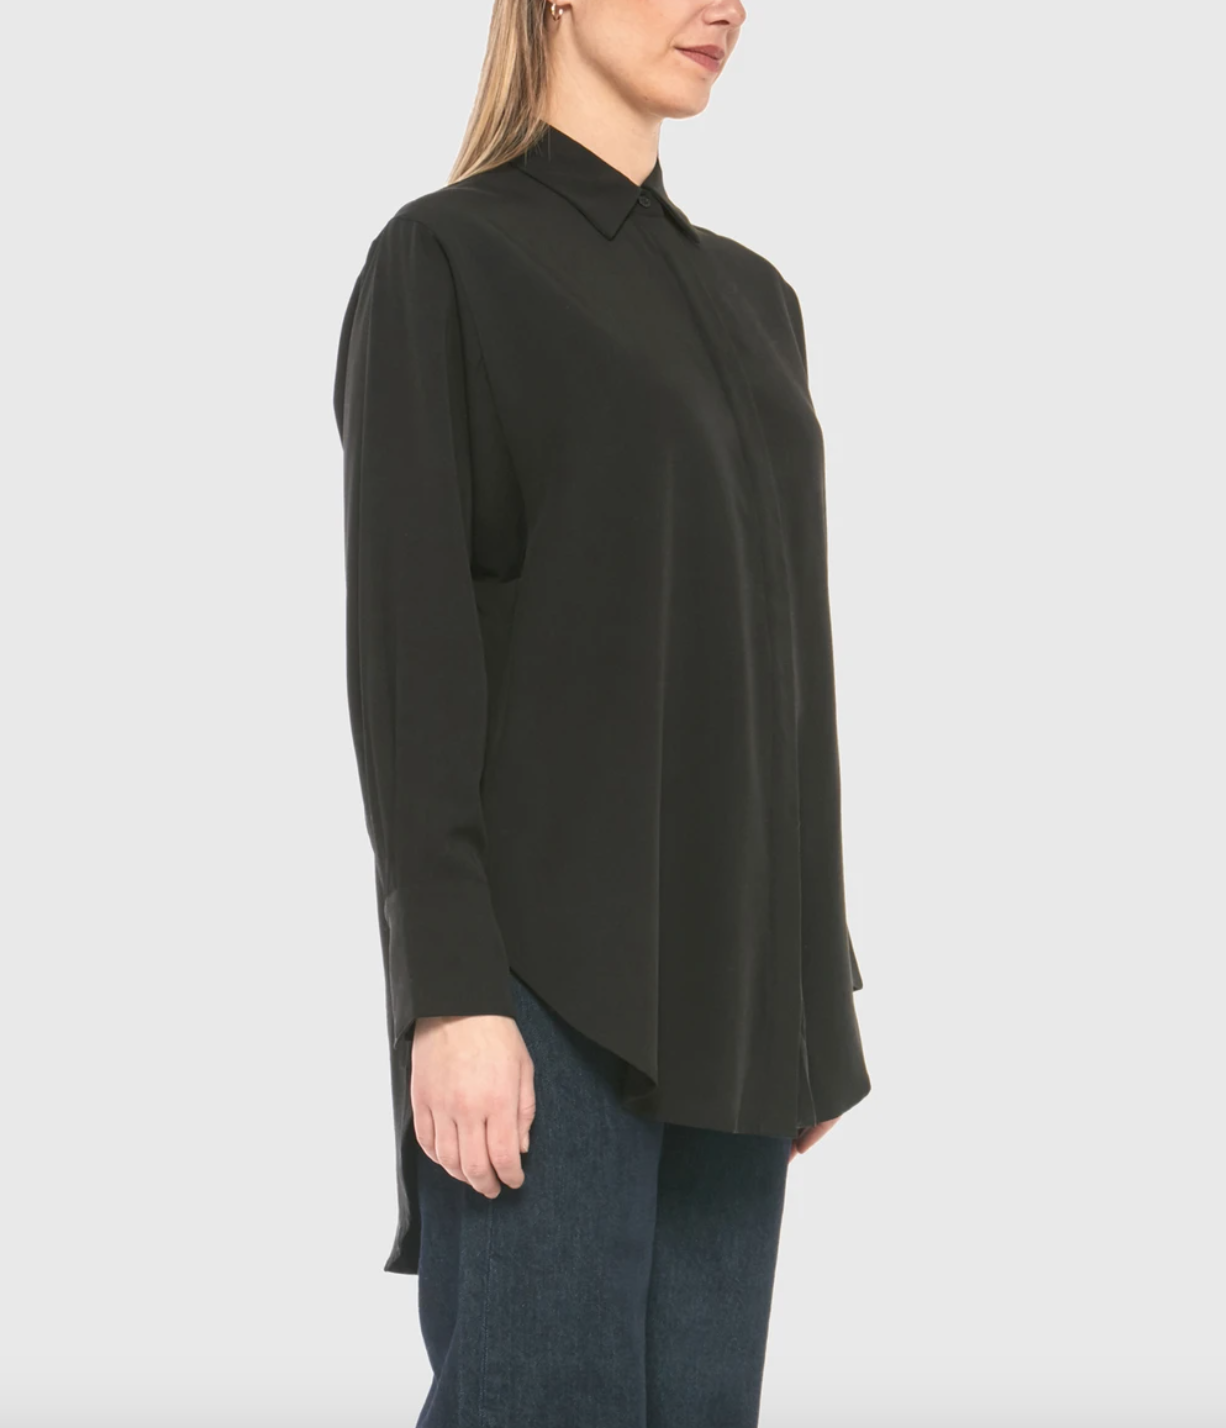 Lola Jeans- Vivian Button Up Top in Black